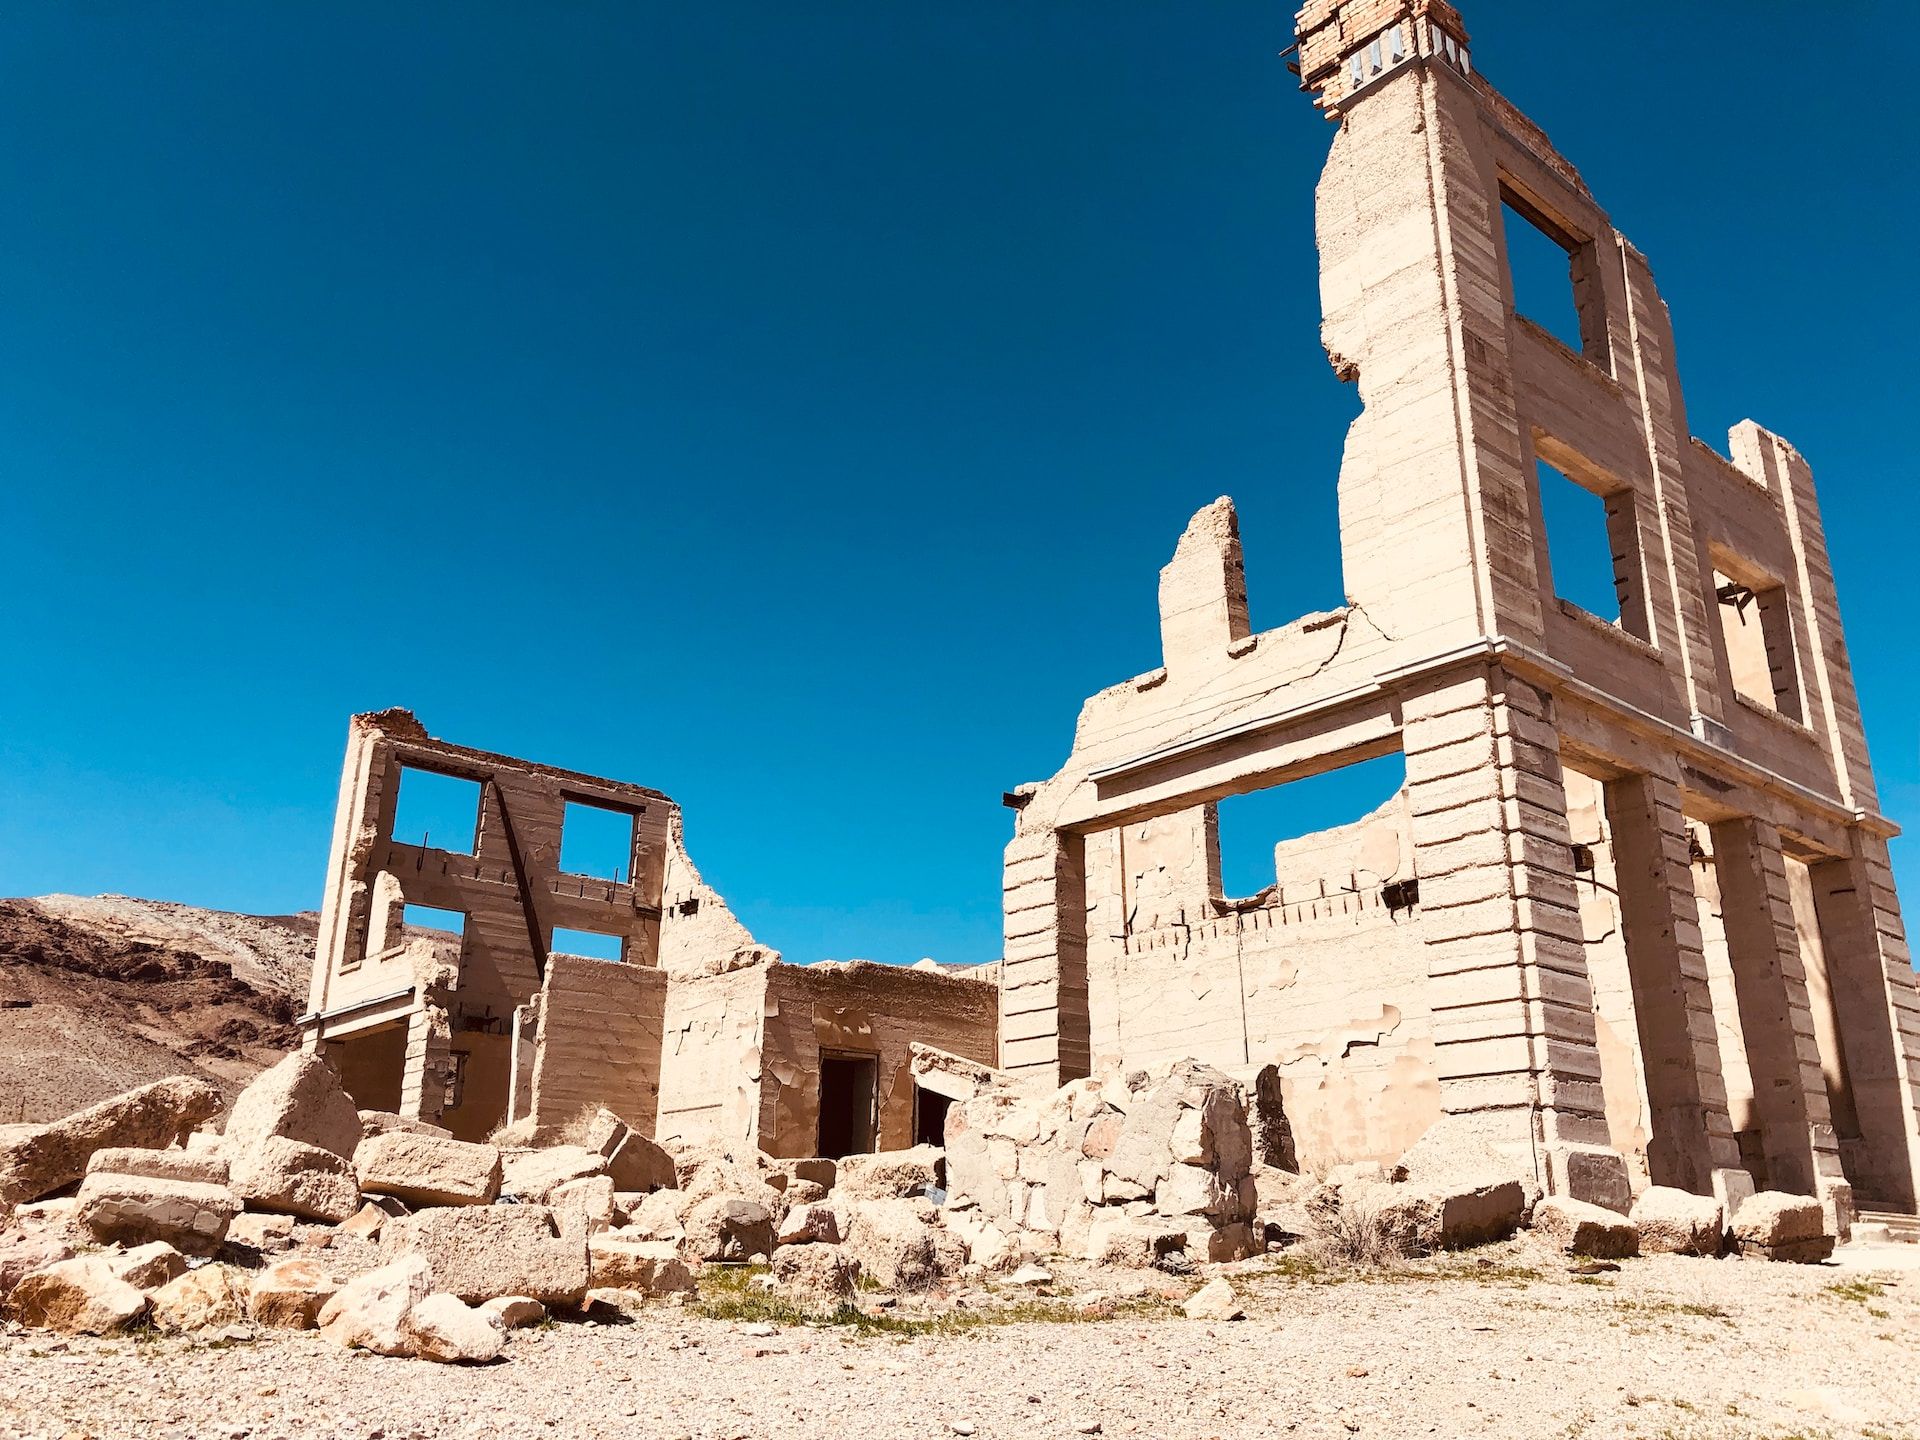 The ruins of the abandoned ghost town of Rhyolite in Nevada